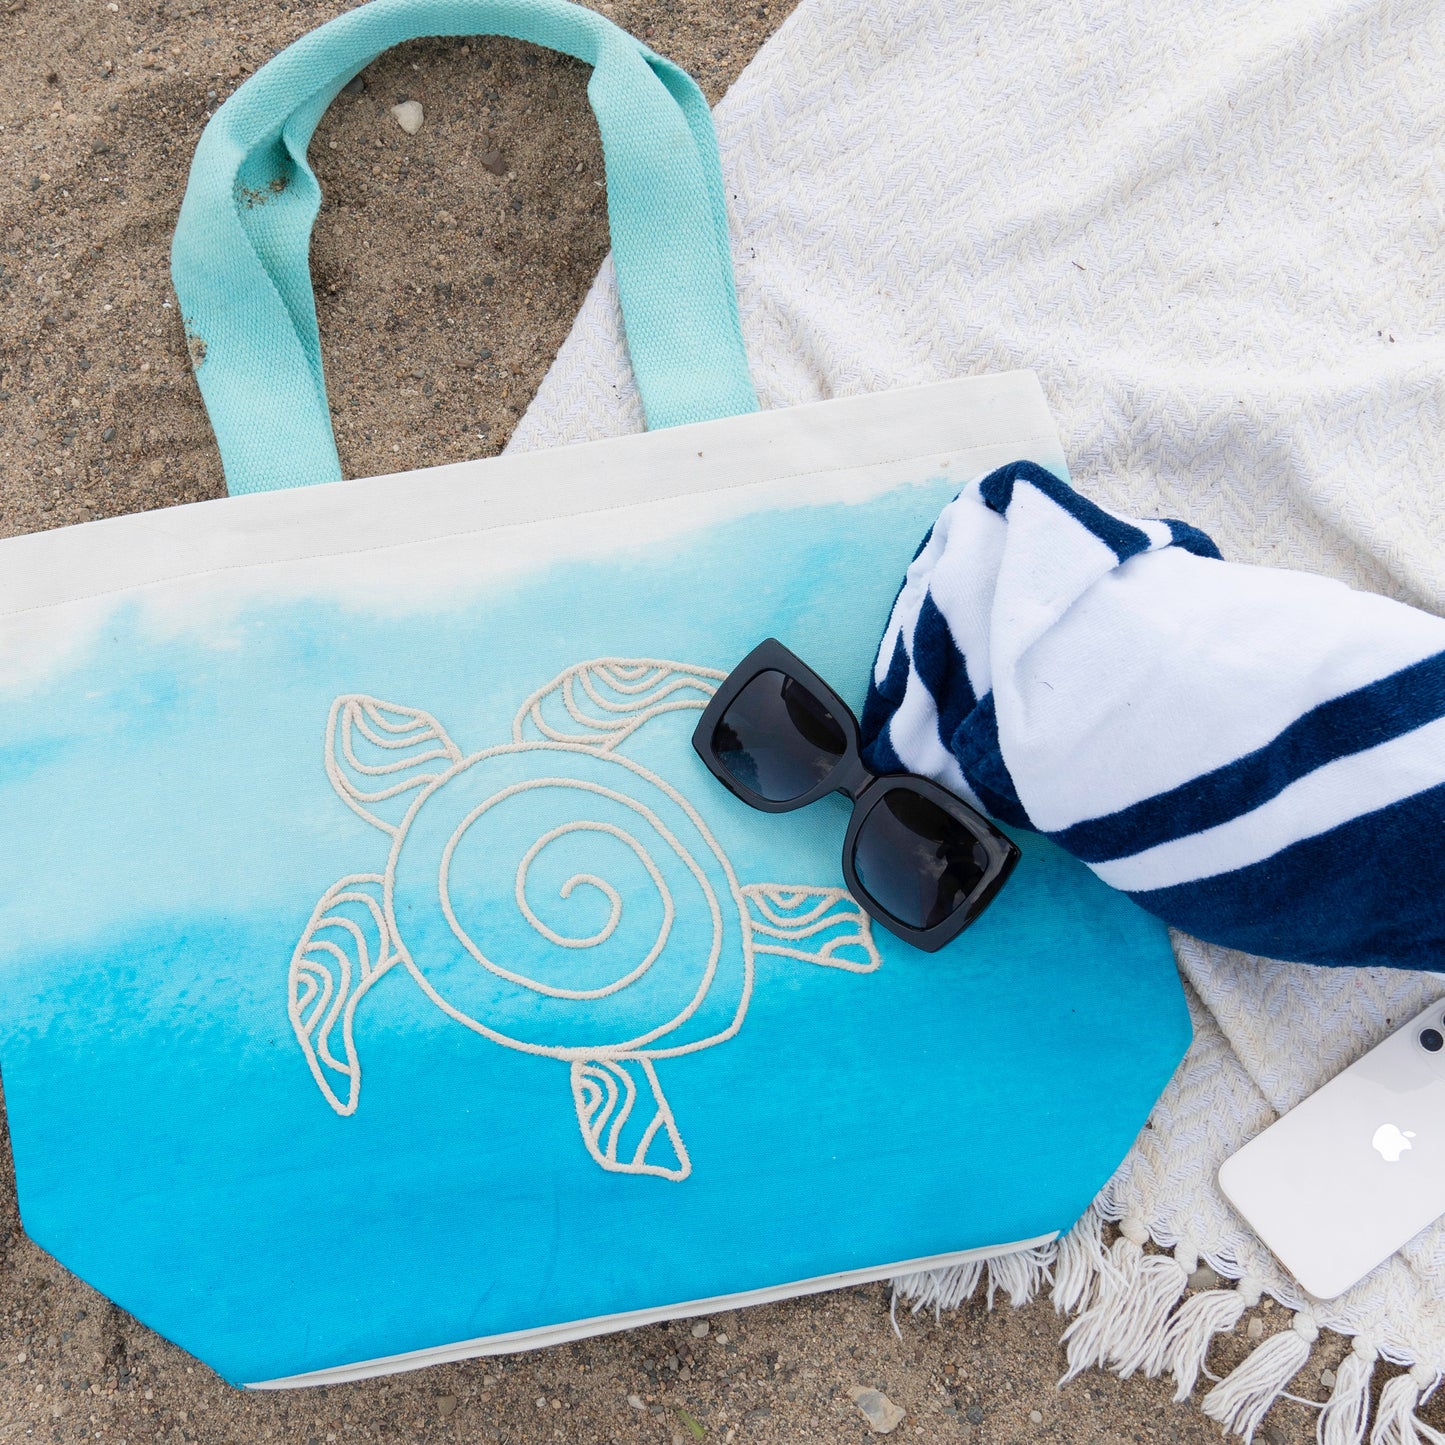 Maui Water Resistant Hand Embroidered Beach Tote Bag